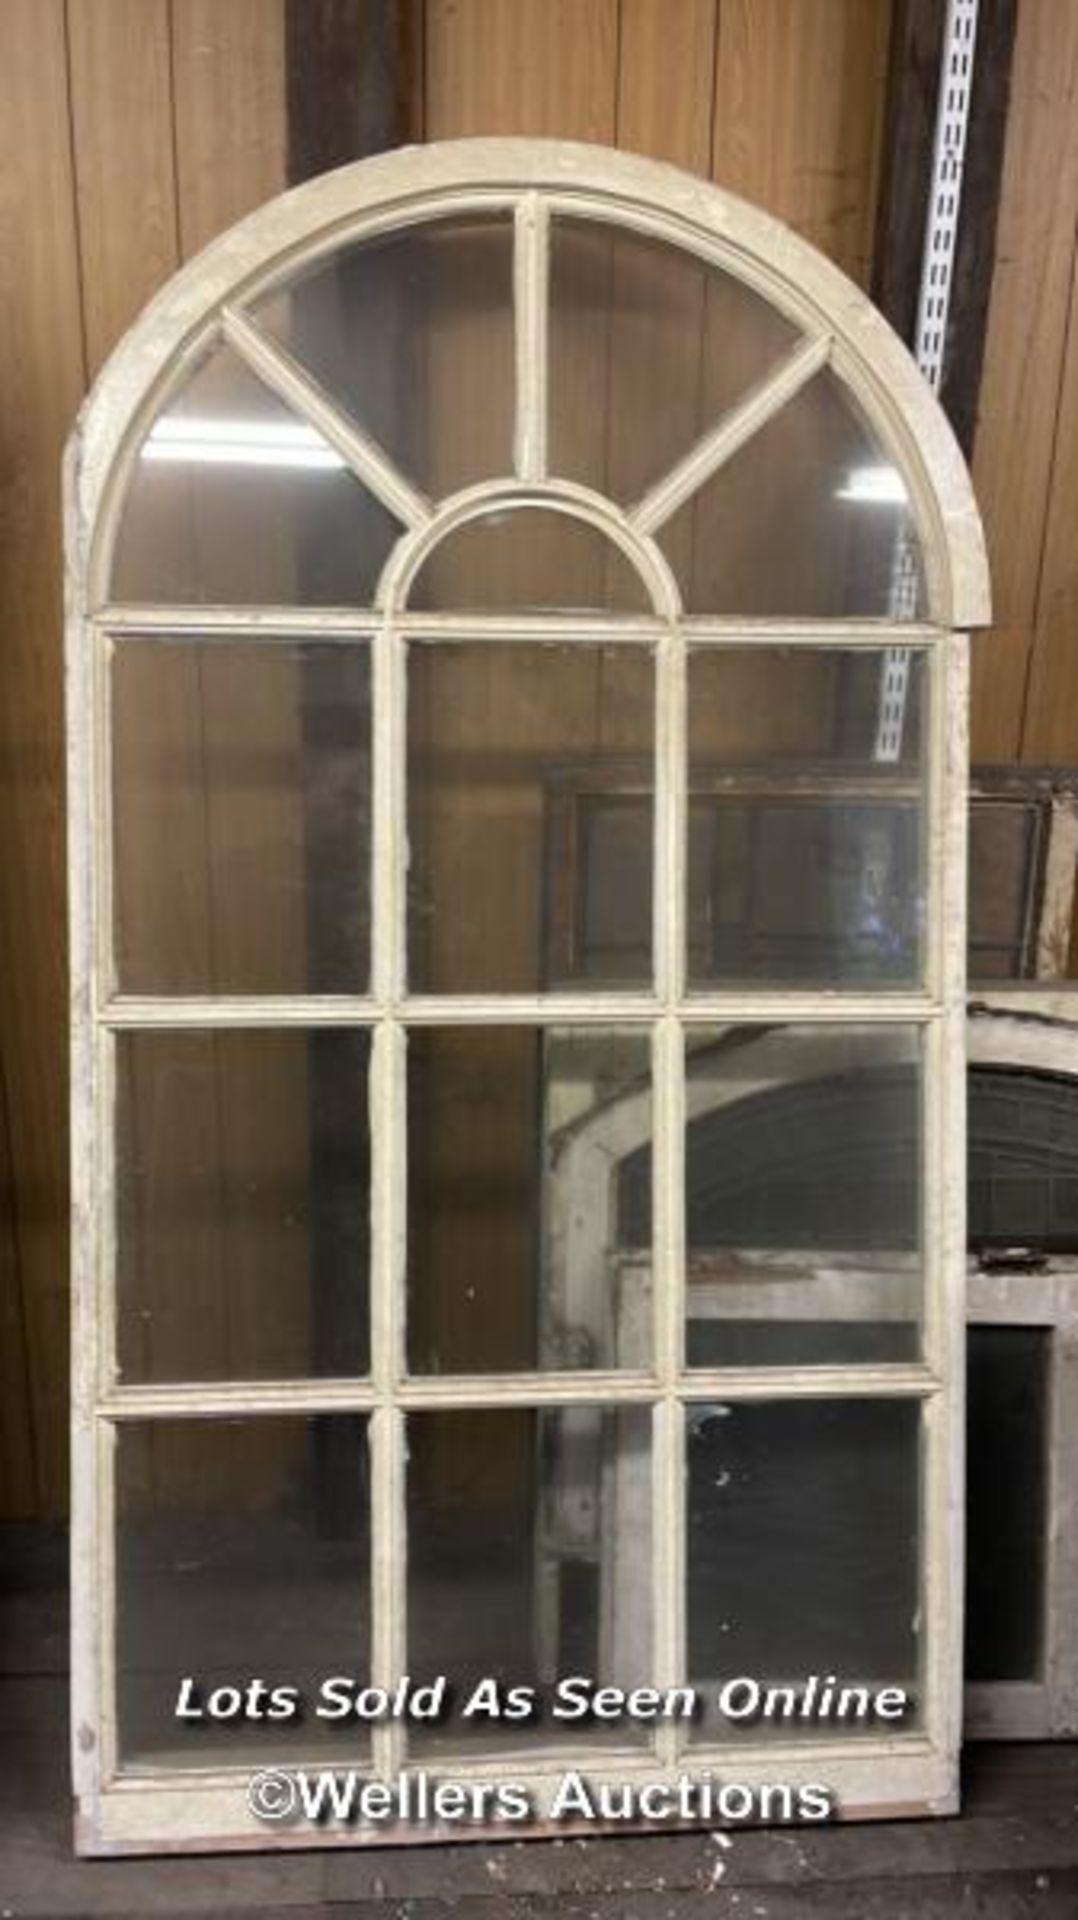 ARCHED WINDOW IN WOODEN FRAME, GLASS PANELS IN GOOD CONDITION, 89CM (W) X 165CM (H)